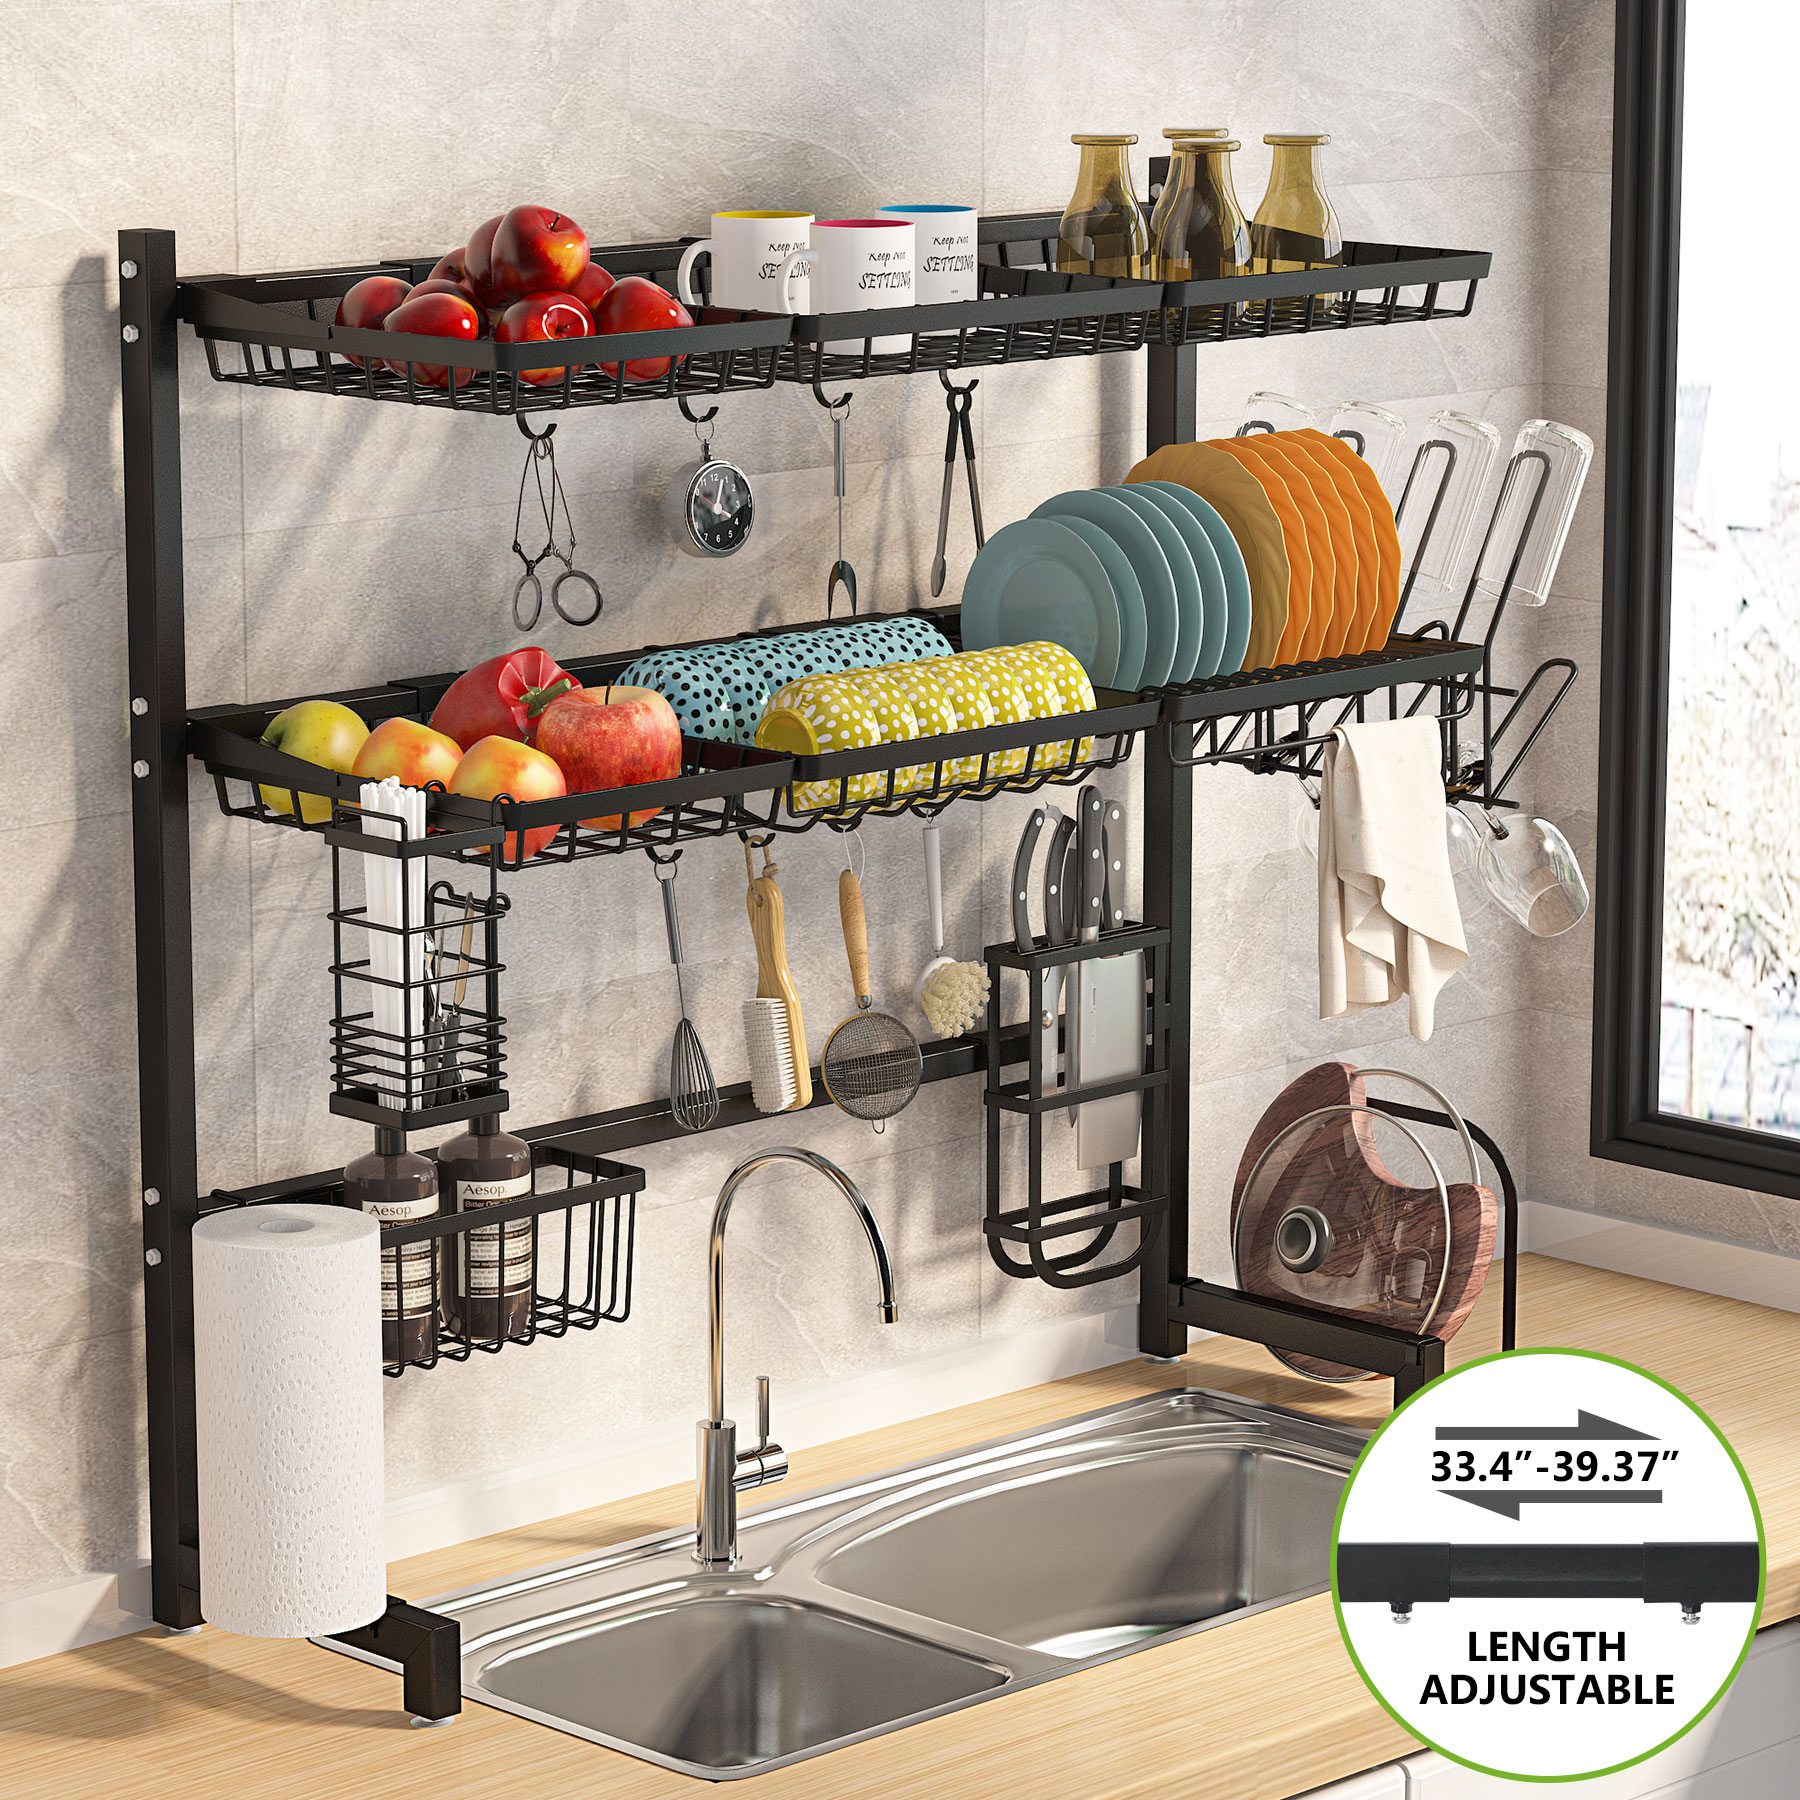 Over The Sink Dish Drying Rack -1Easylife 3 Tier Stainless Steel Large Kitchen Rack Dish Drainers for Home Kitchen Counter Storage - Black